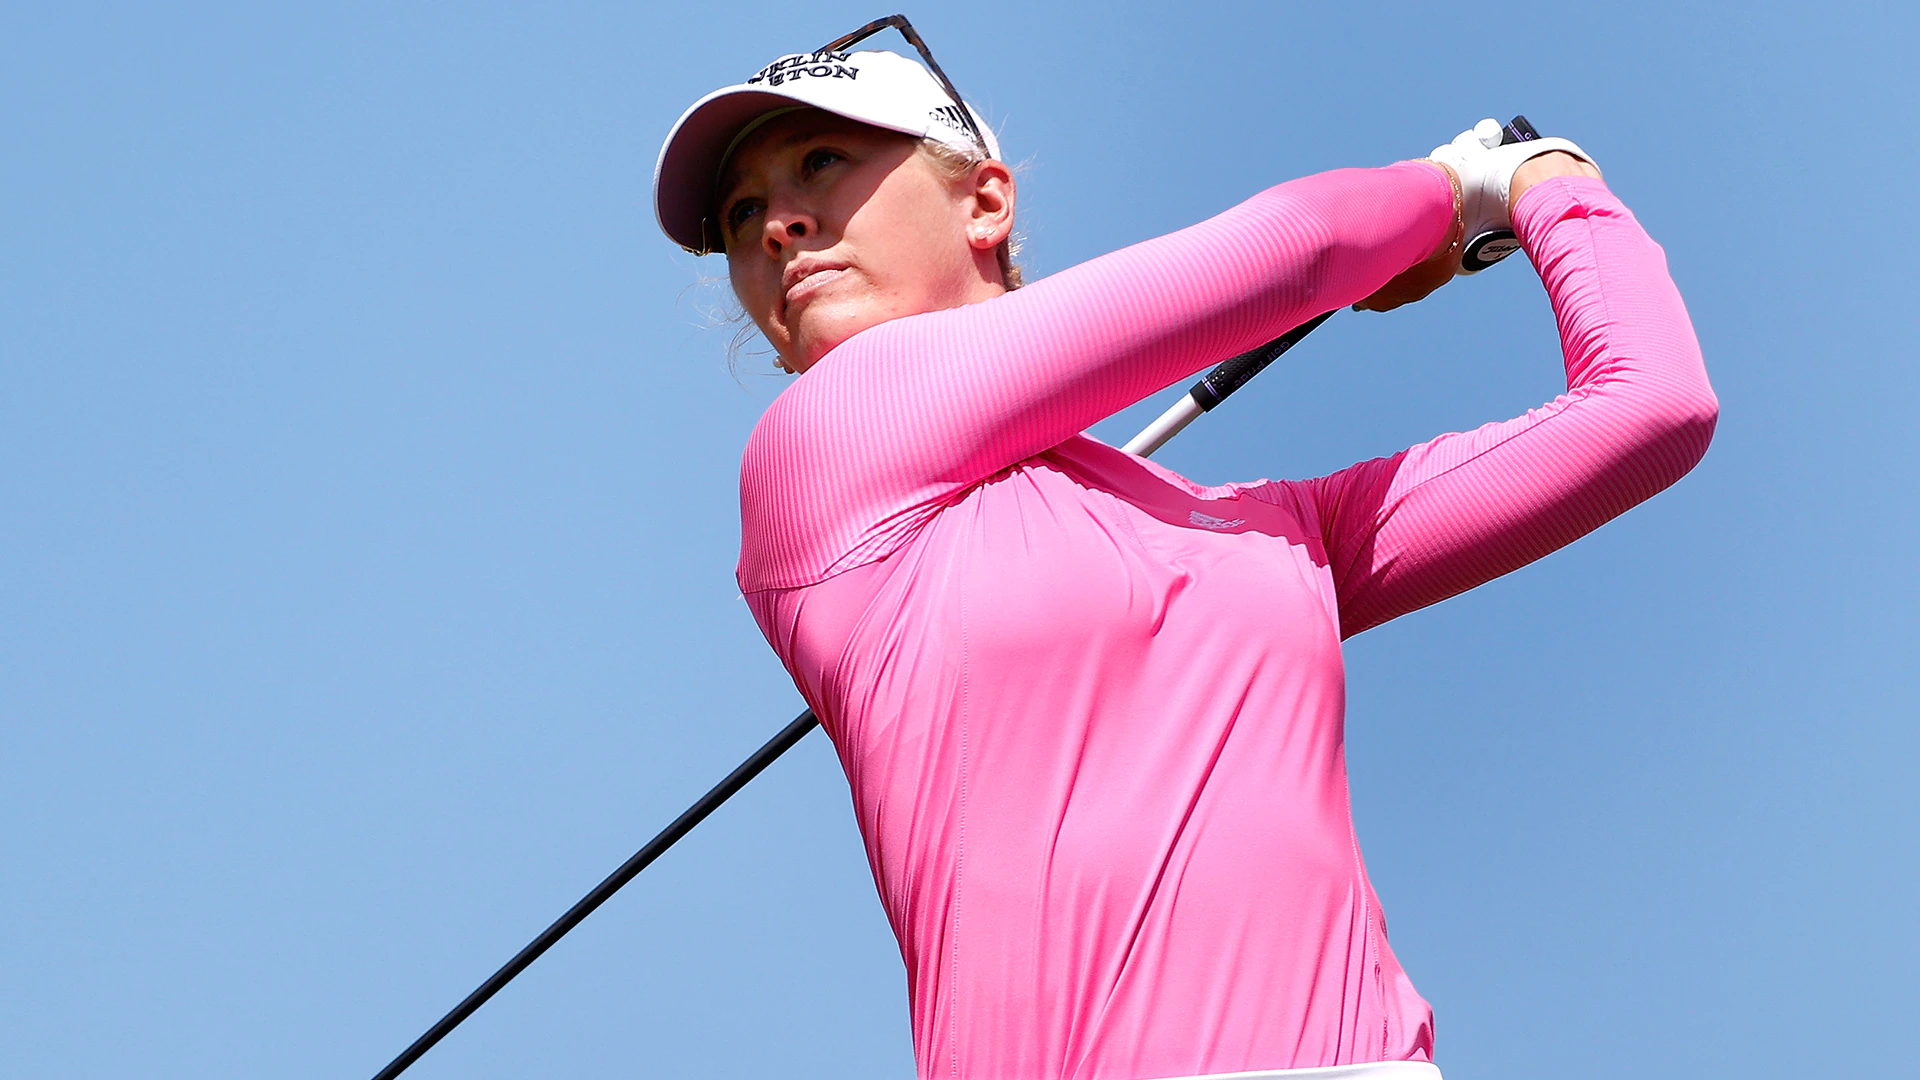 ‘Just another good day’: Jessica Korda follows 64 with 65 at L.A. Open